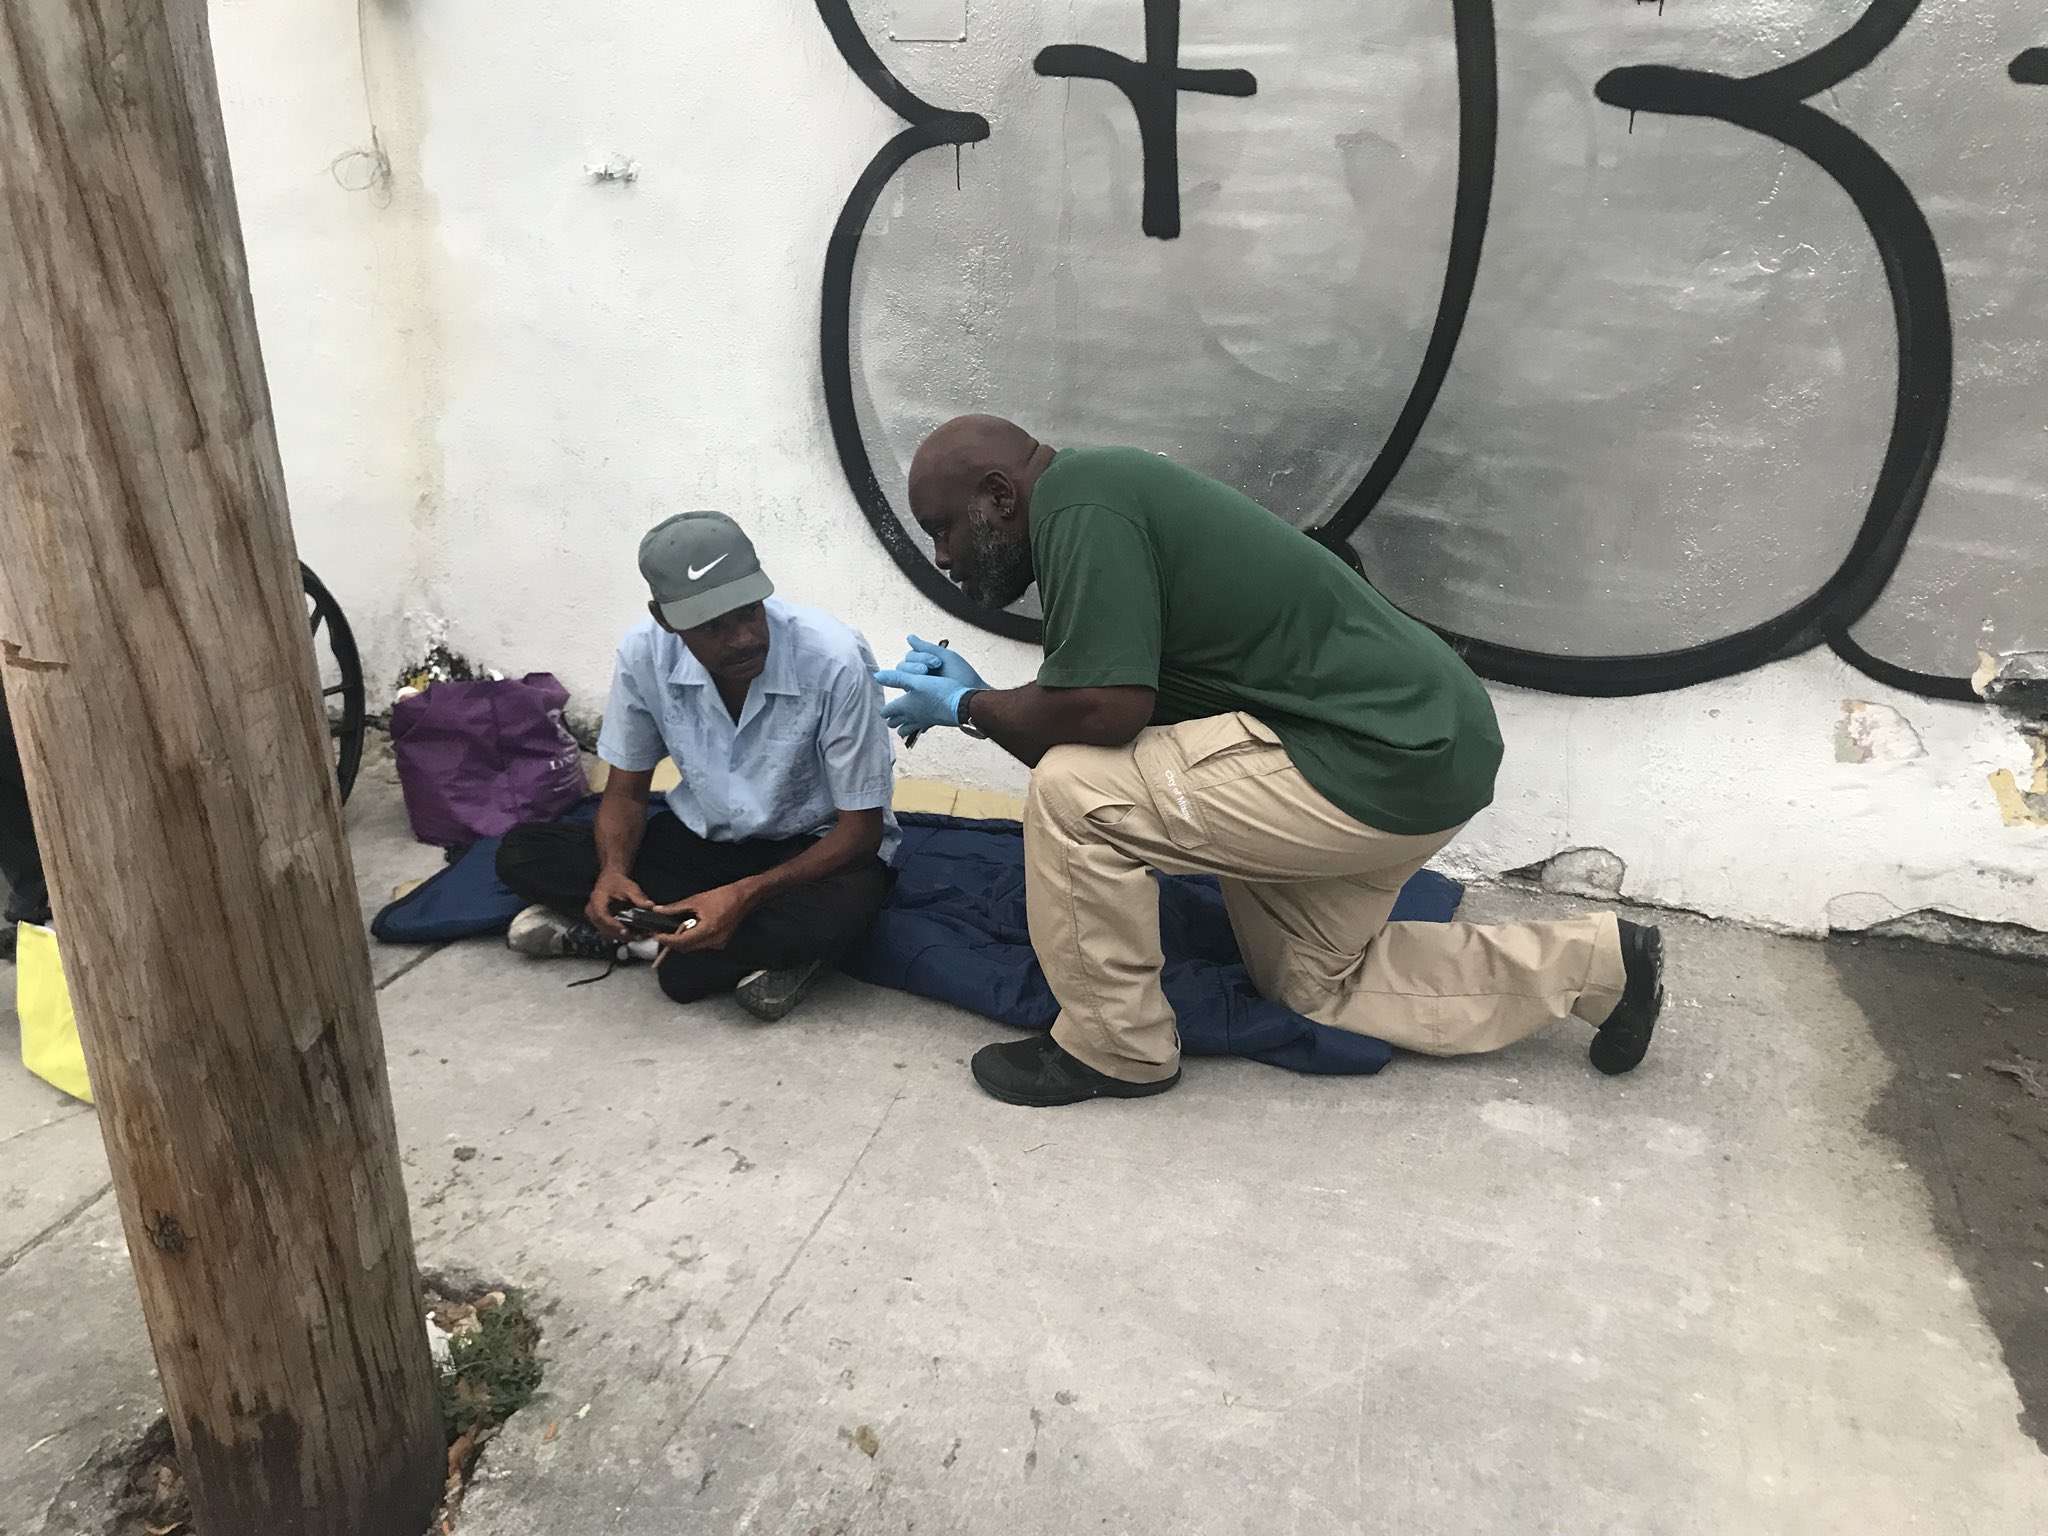 City of Miami on Twitter: " 53 homeless people are sleeping ...